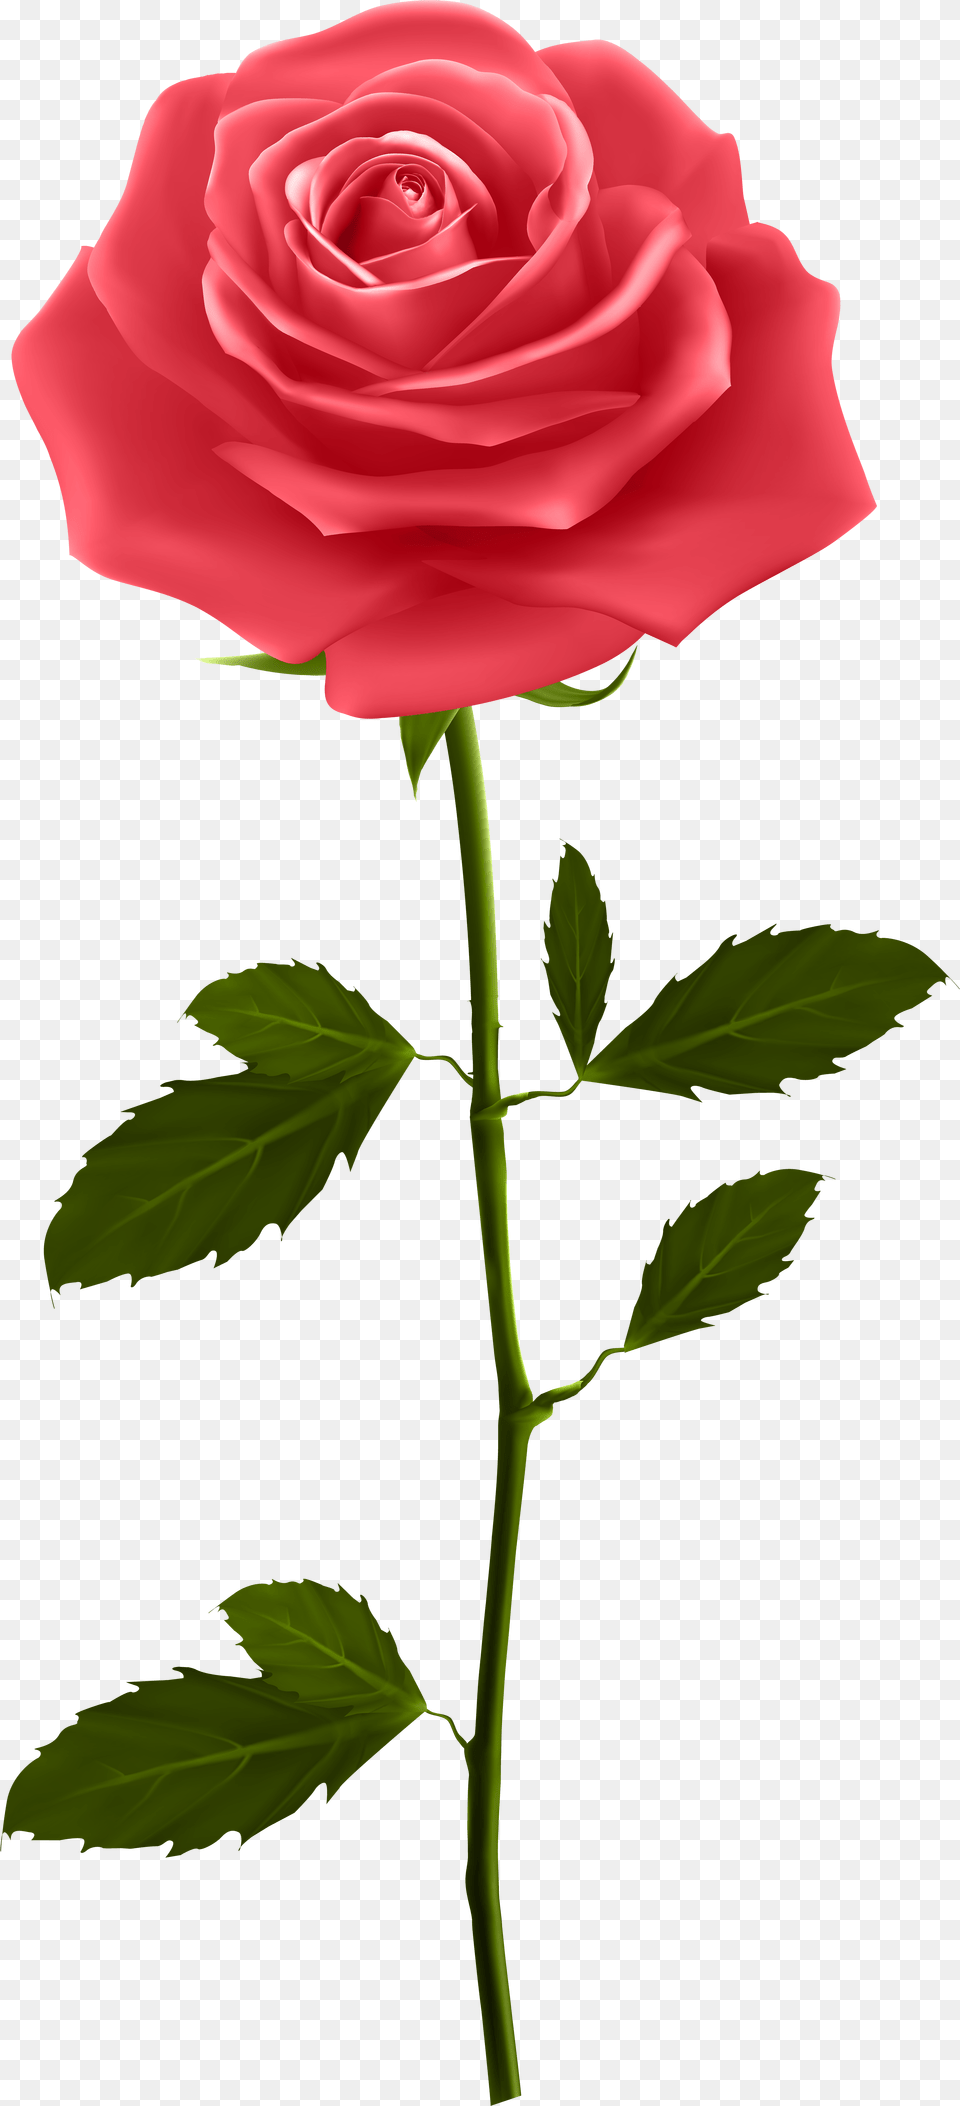 Red Rose With Stem Clip Art Red Rose With Stem, Flower, Plant Png